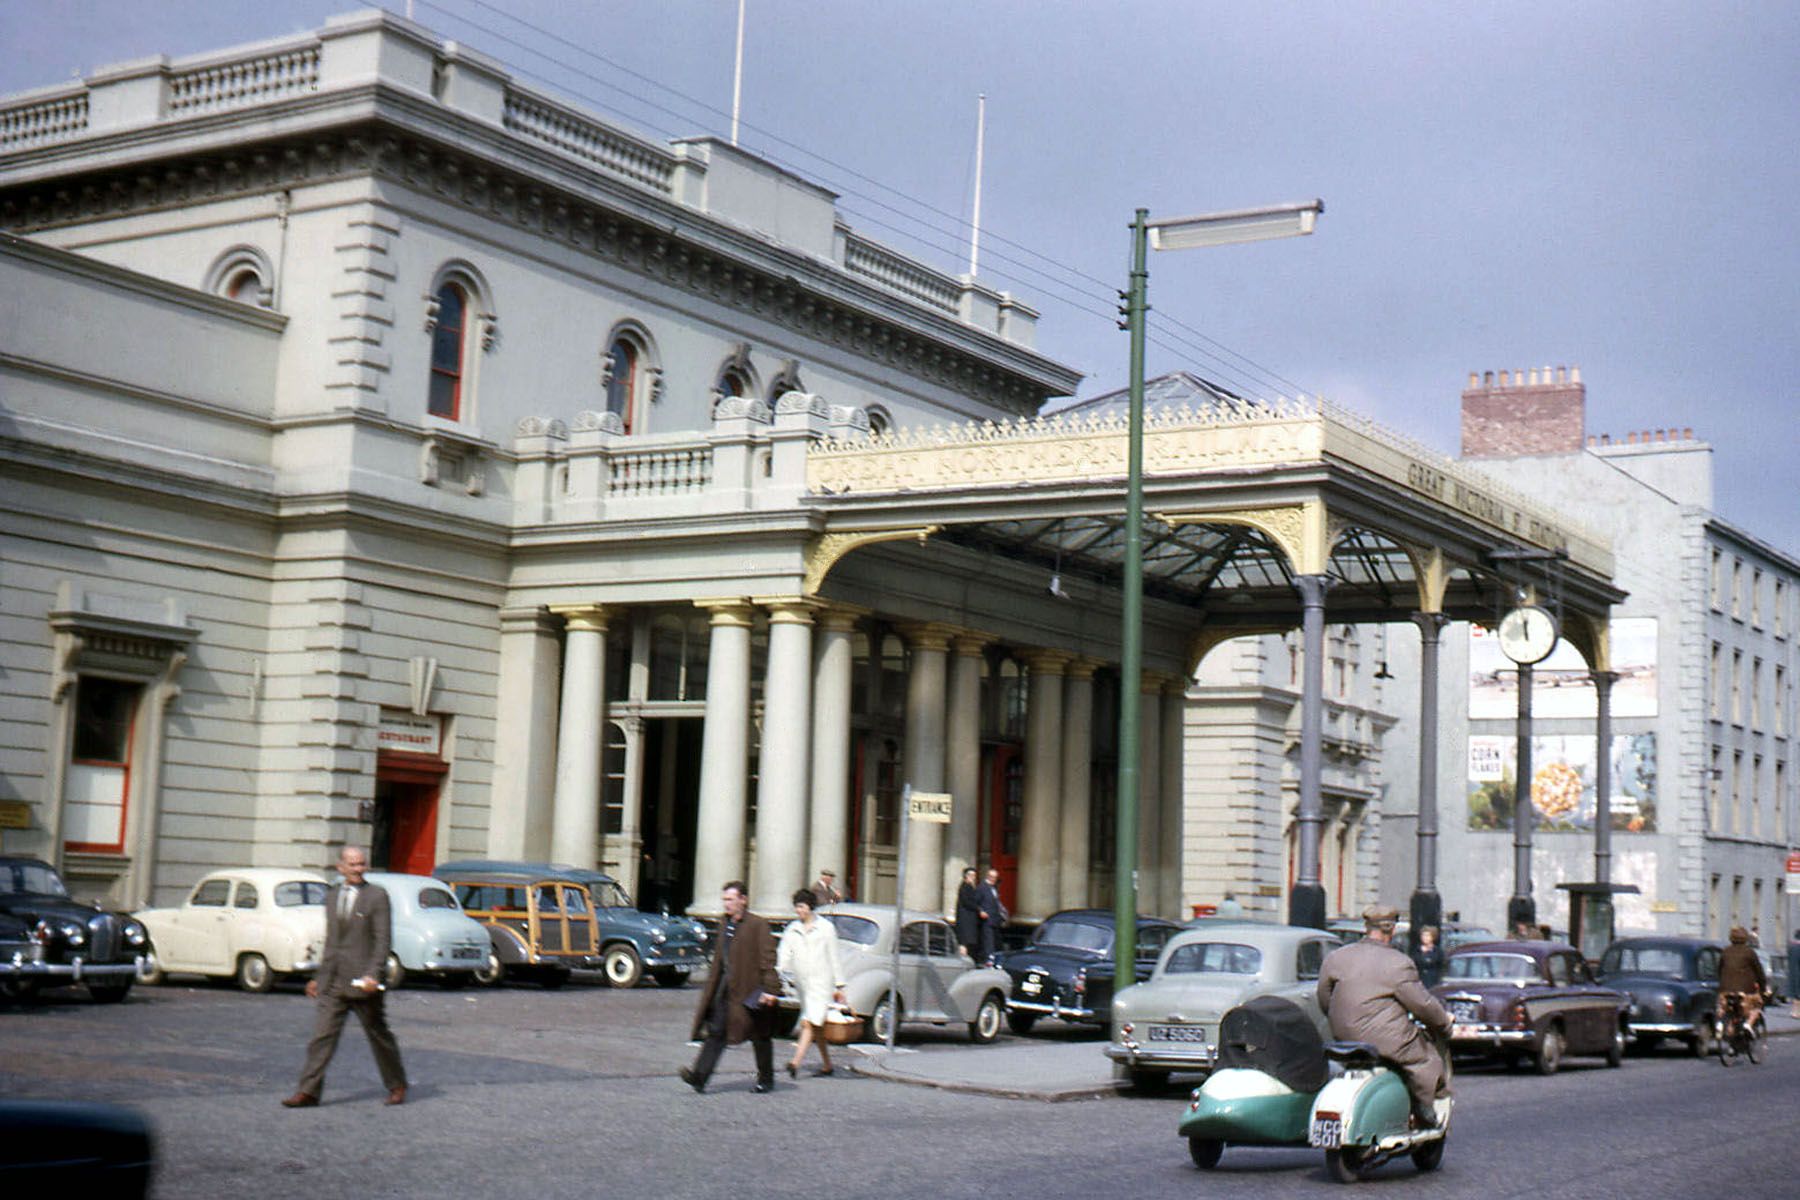 BACK IN THE DAY: Great Victoria Street Train Station in the 1940s